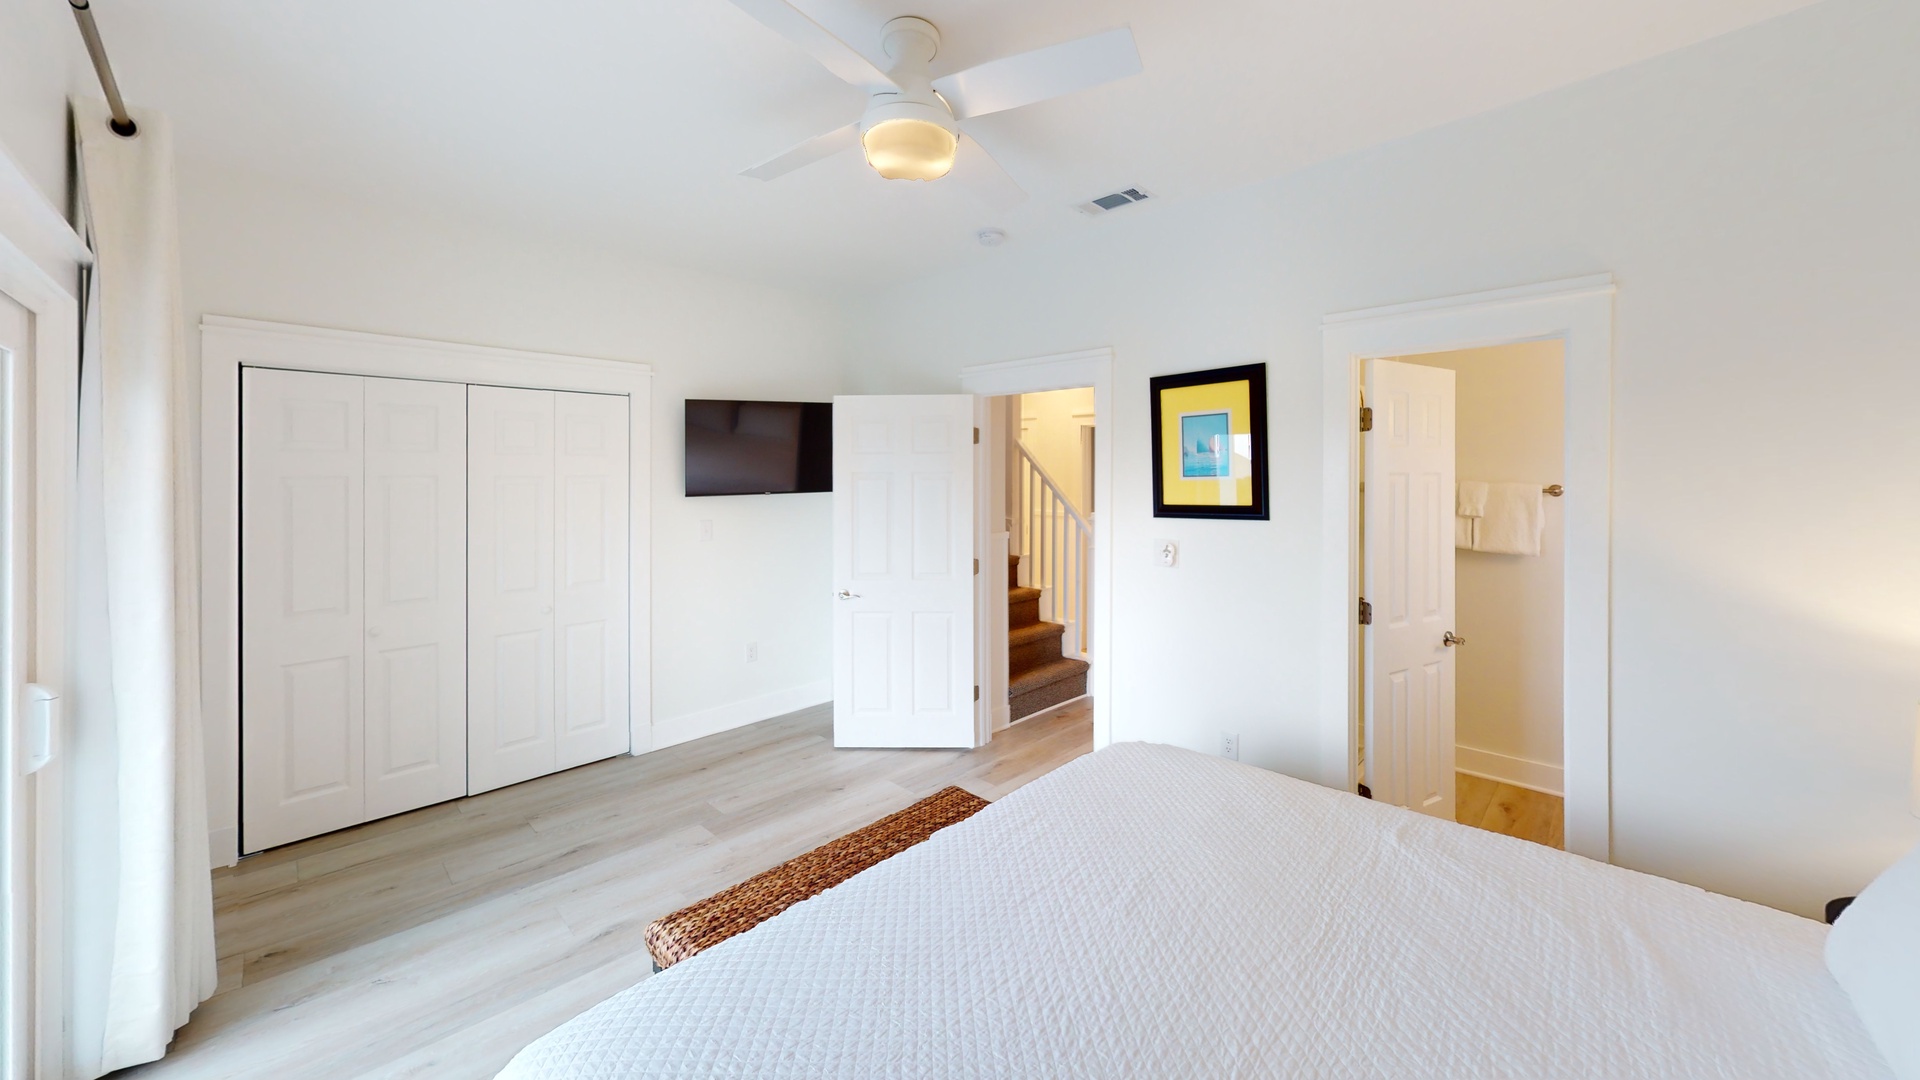 Bedroom 6 is equipped with a ceiling fan, TV and a private bathroom